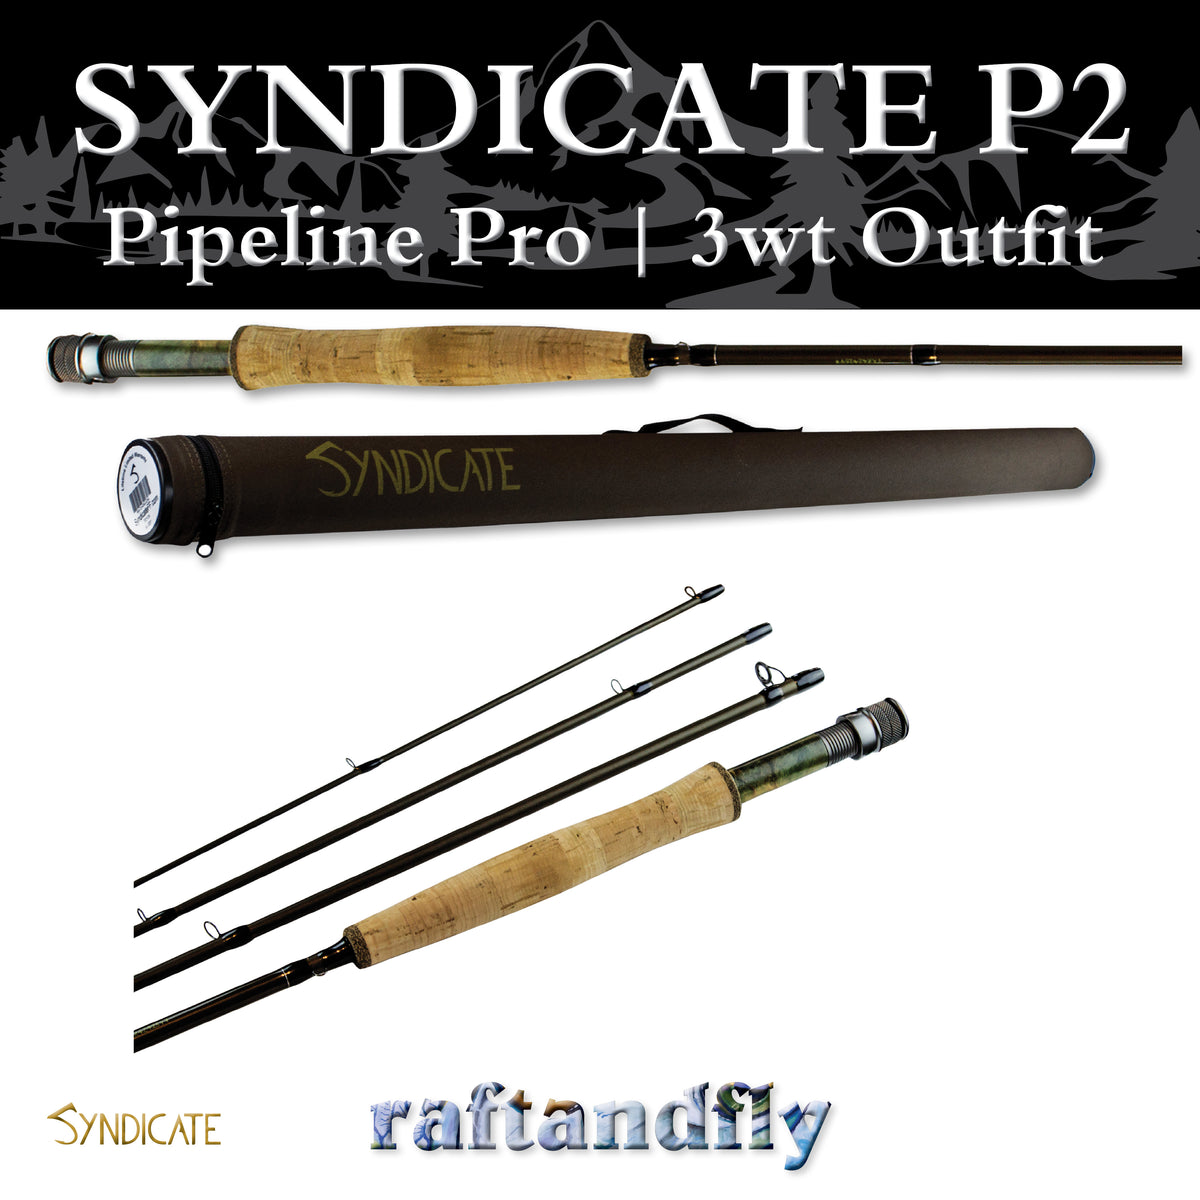 Syndicate P2 1024 10' 2wt Fly Rod - Competitive Angler